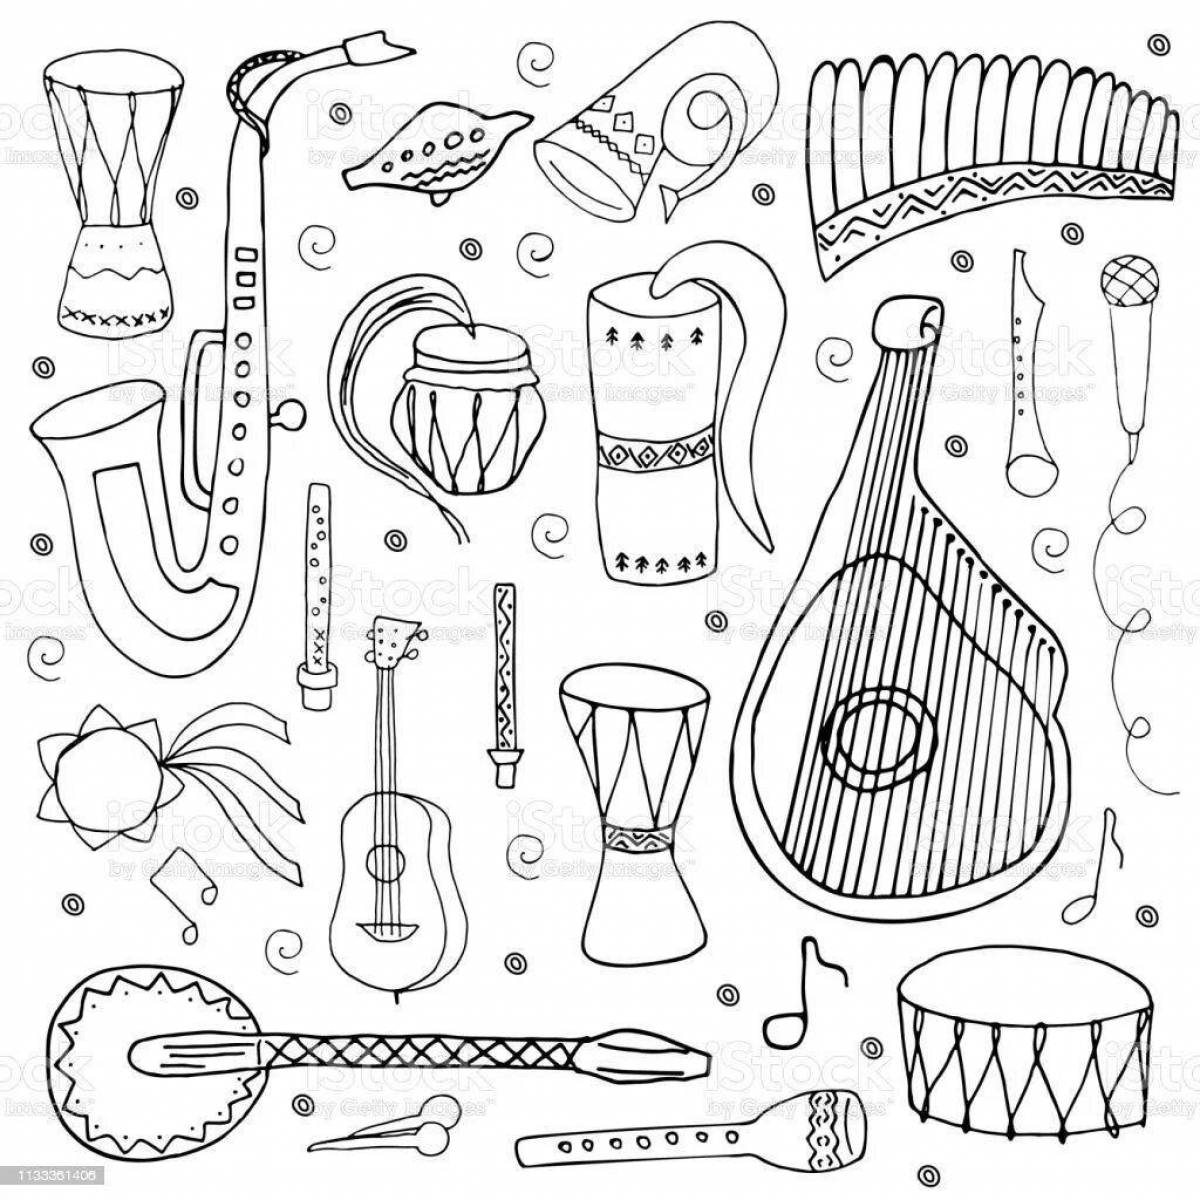 Adorable coloring book of Russian folk instruments for kids